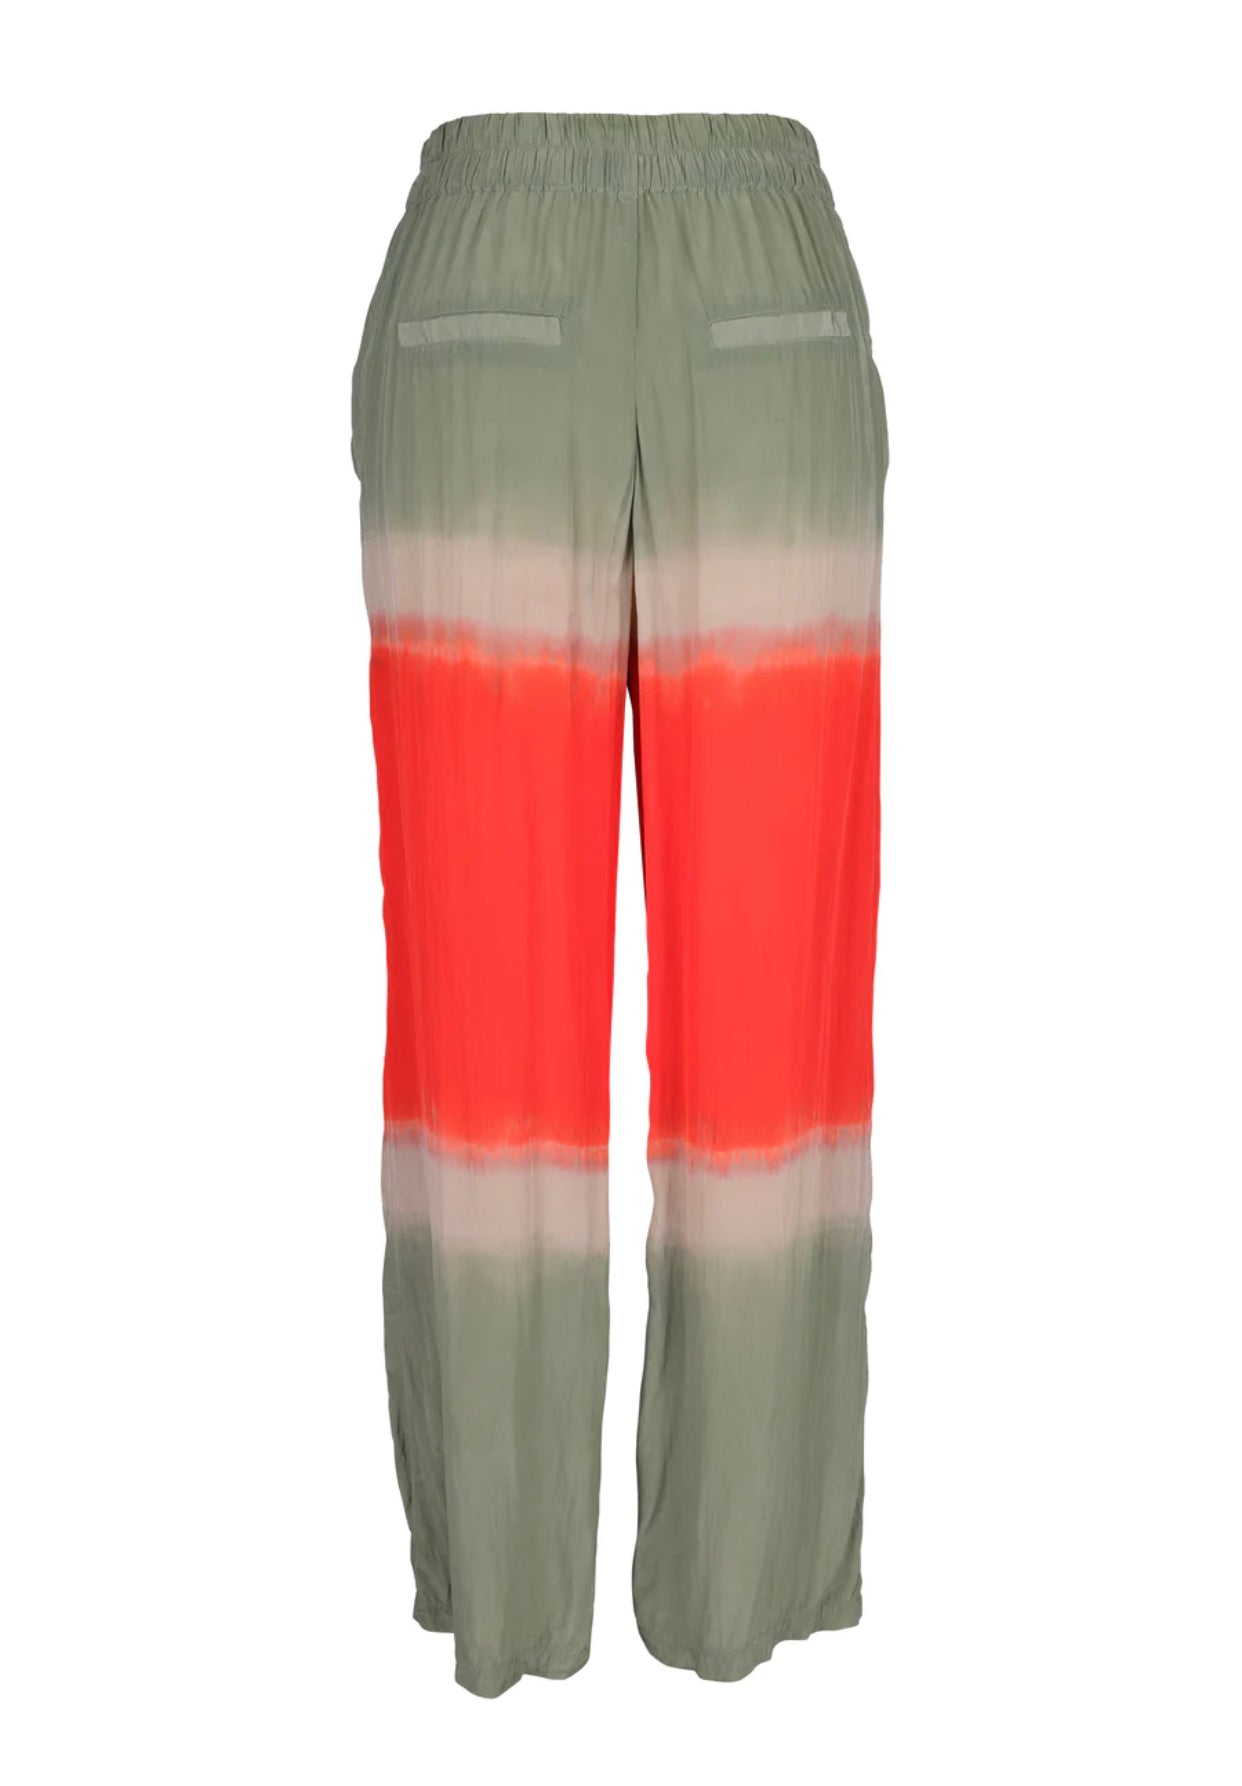 Elina Tina Trouser in Army Mix